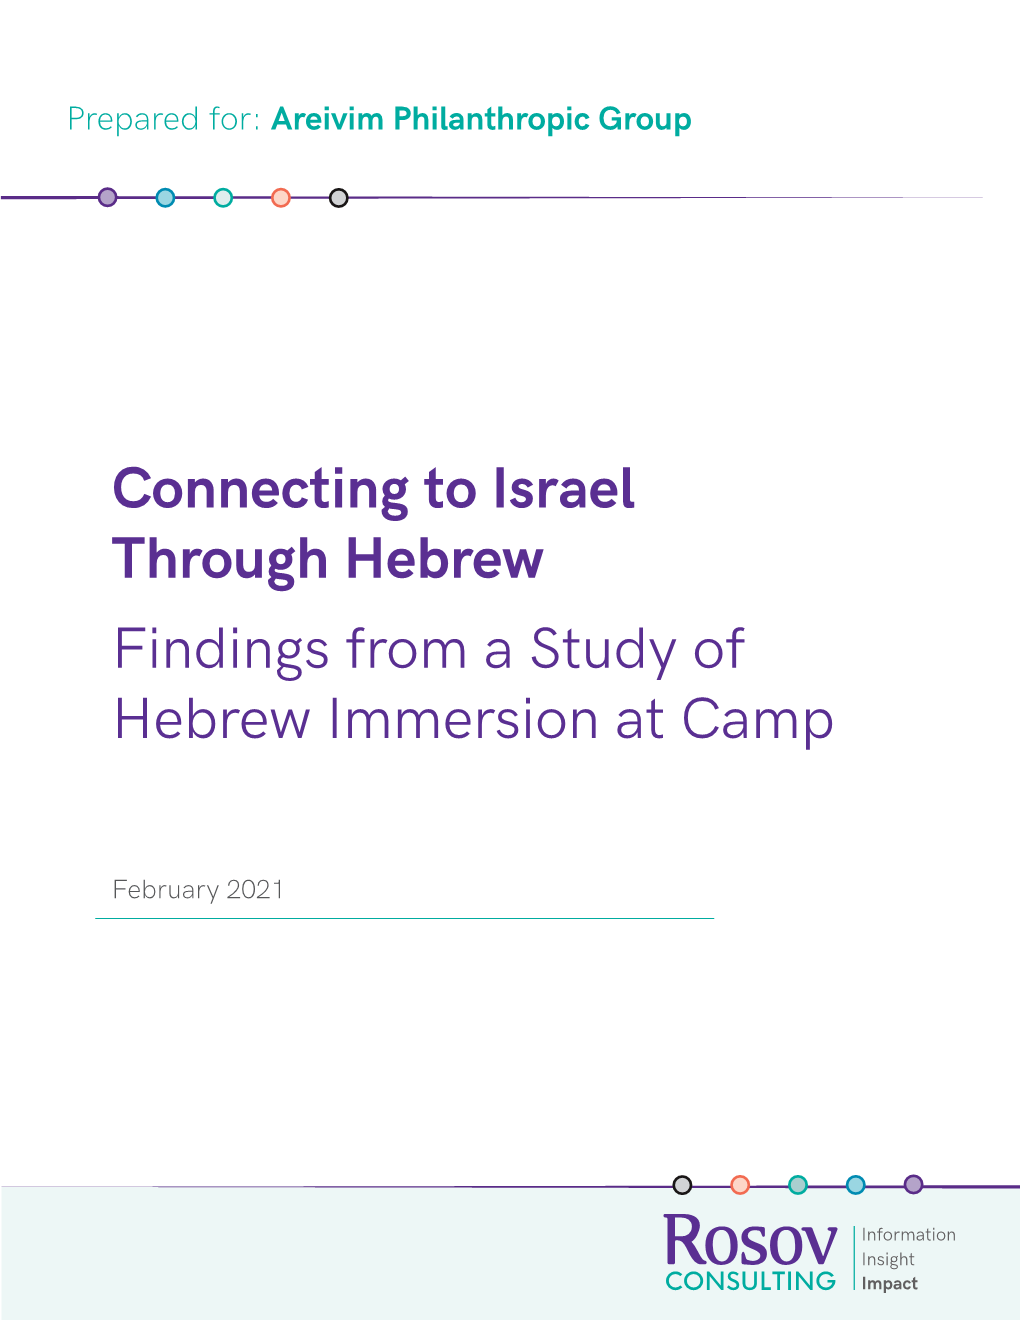 Connecting to Israel Through Hebrew Findings from a Study of Hebrew Immersion at Camp